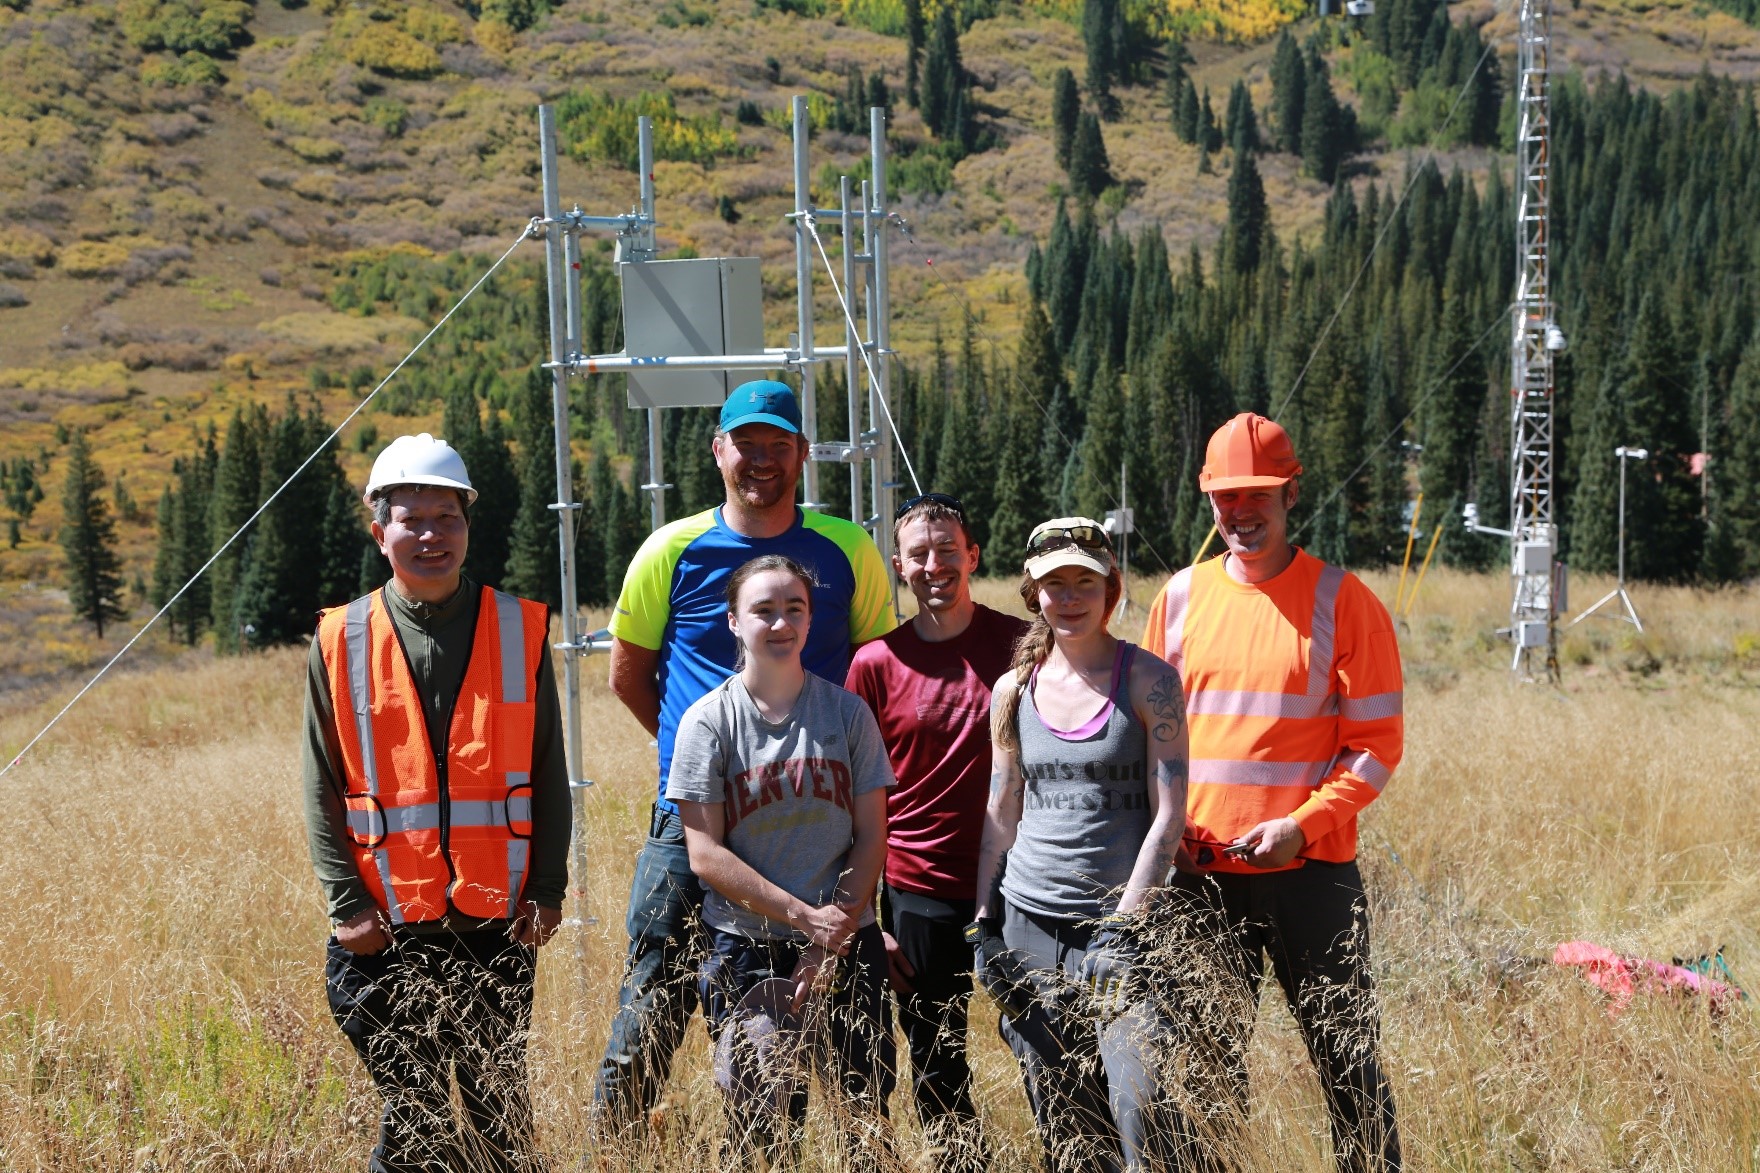 In the fall of 2021, the SAIL-NET group installing aerosol-cloud interaction arrays paused in front of an installation near Gothic Mountain. From left are Ping Chen, Gavin McMeeking, Kate Patterson, Ezra Levin, and Anna Hodshire―all from Handix Scientific. At the far right, in an orange vest, Nick Good of Good Science, LLC. Photo is courtesy of Anna Hodshire.